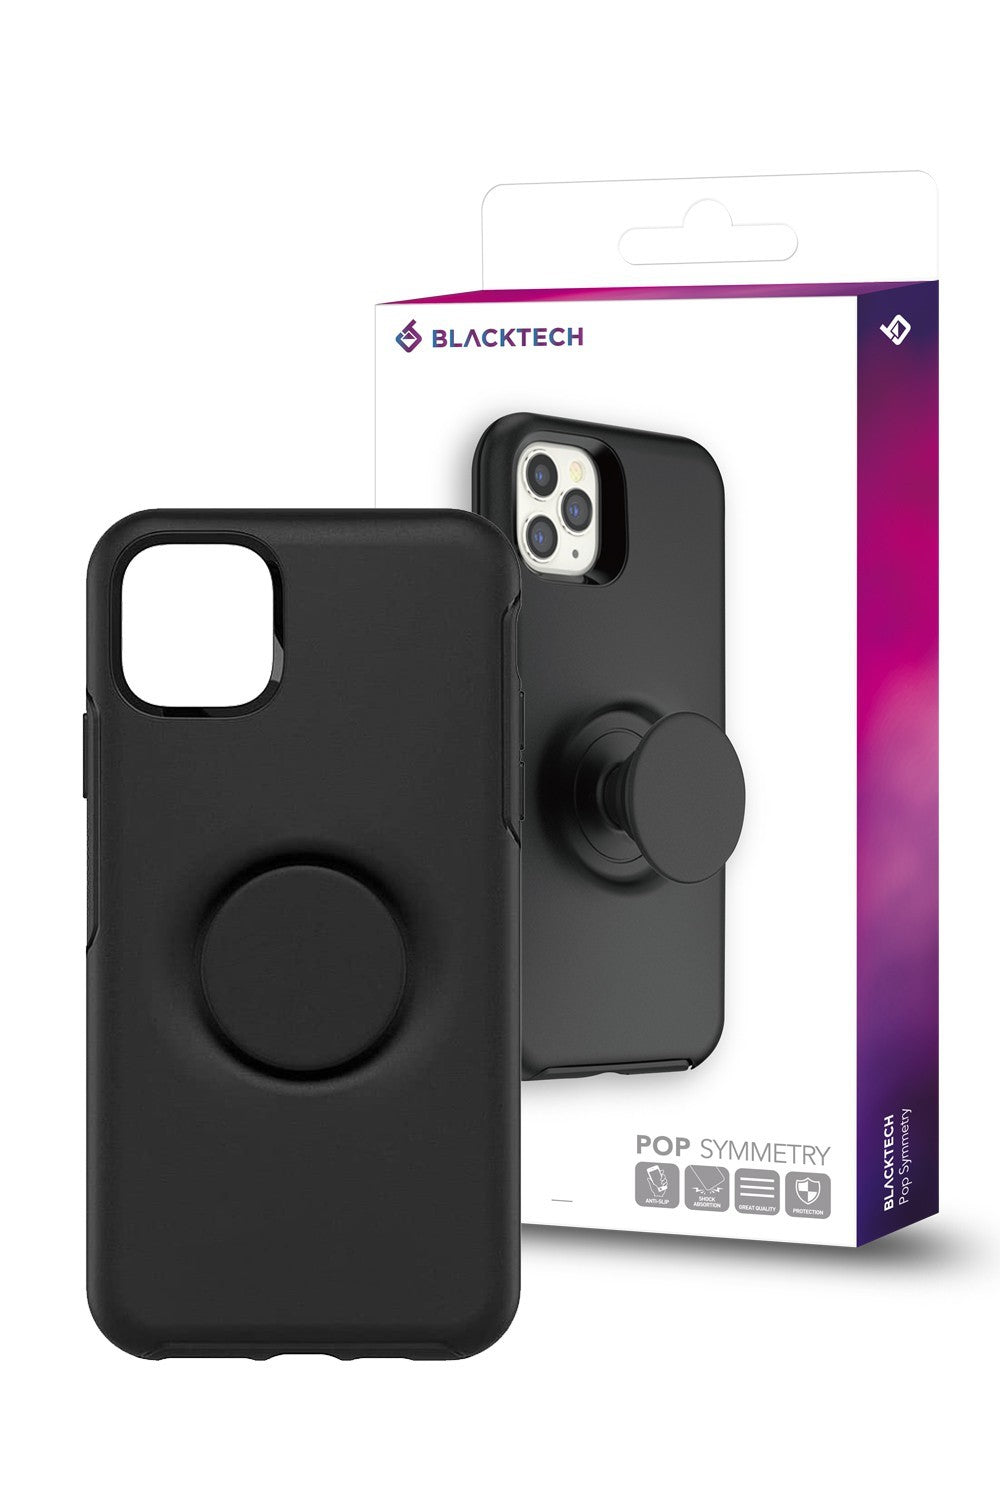 Blacktech iPhone 11 Pro Max Symmetry Pop Up Protective Case